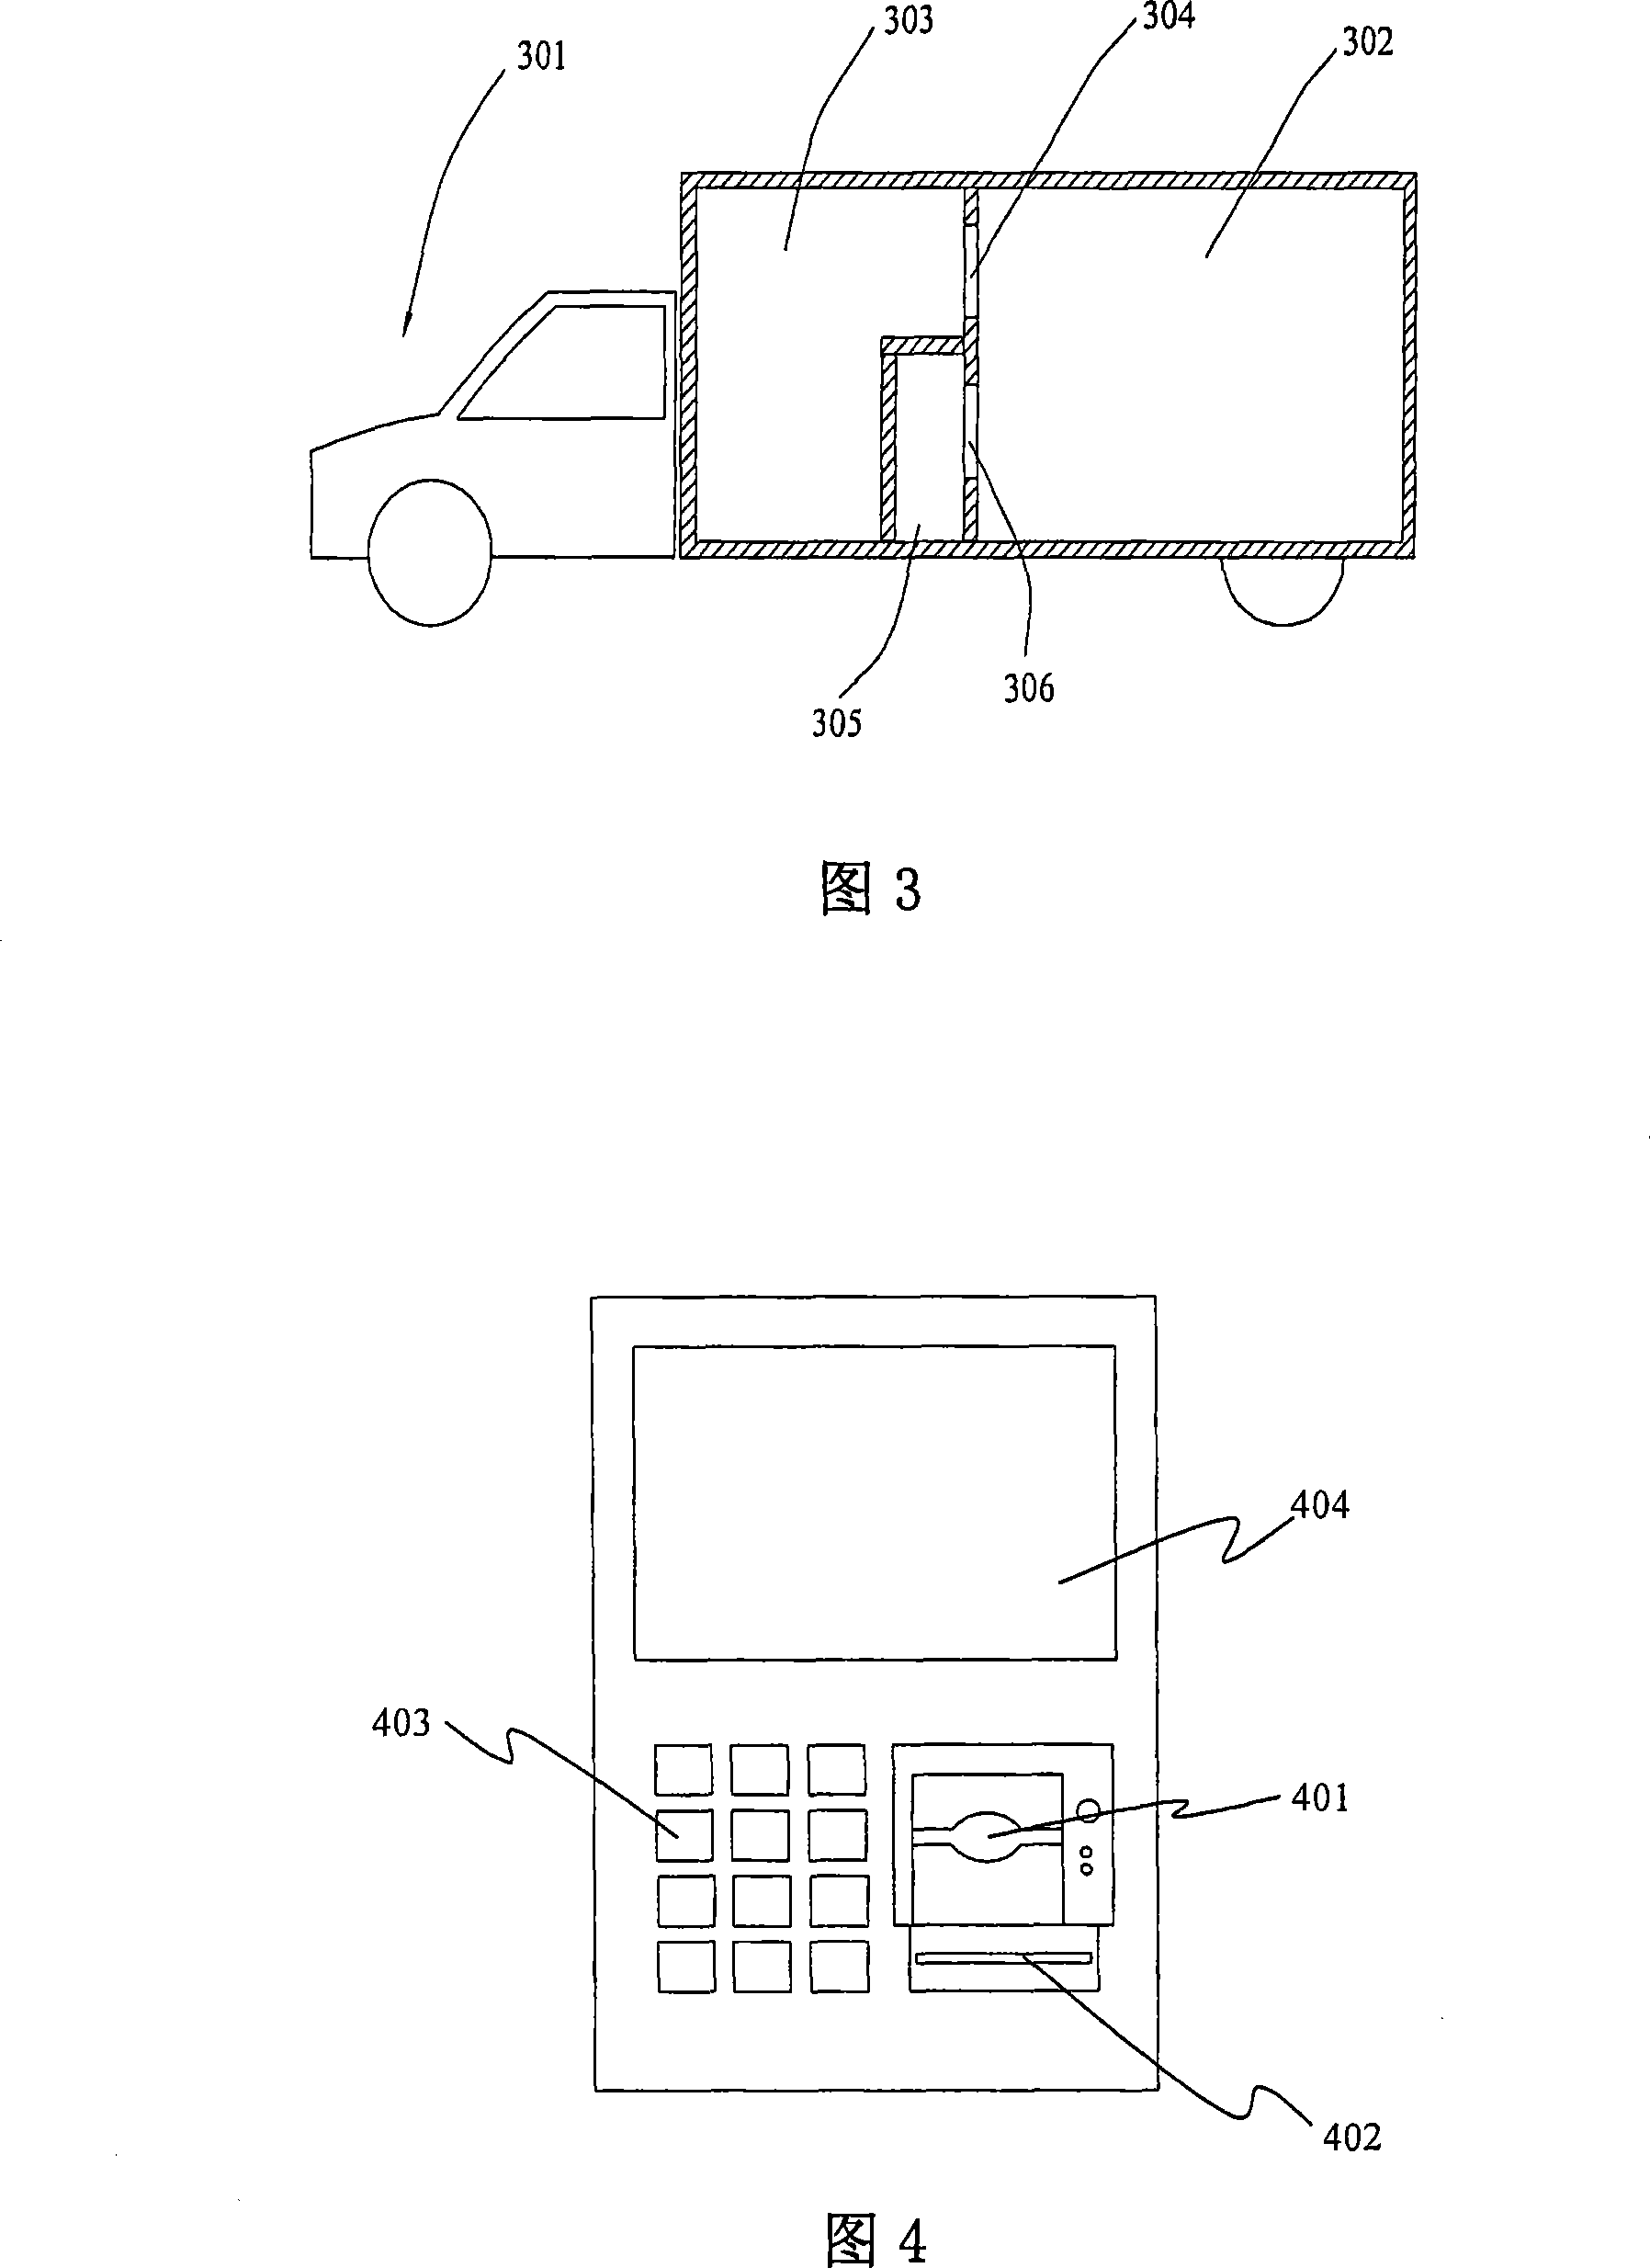 Self-help collection vehicle, collection system and collection method